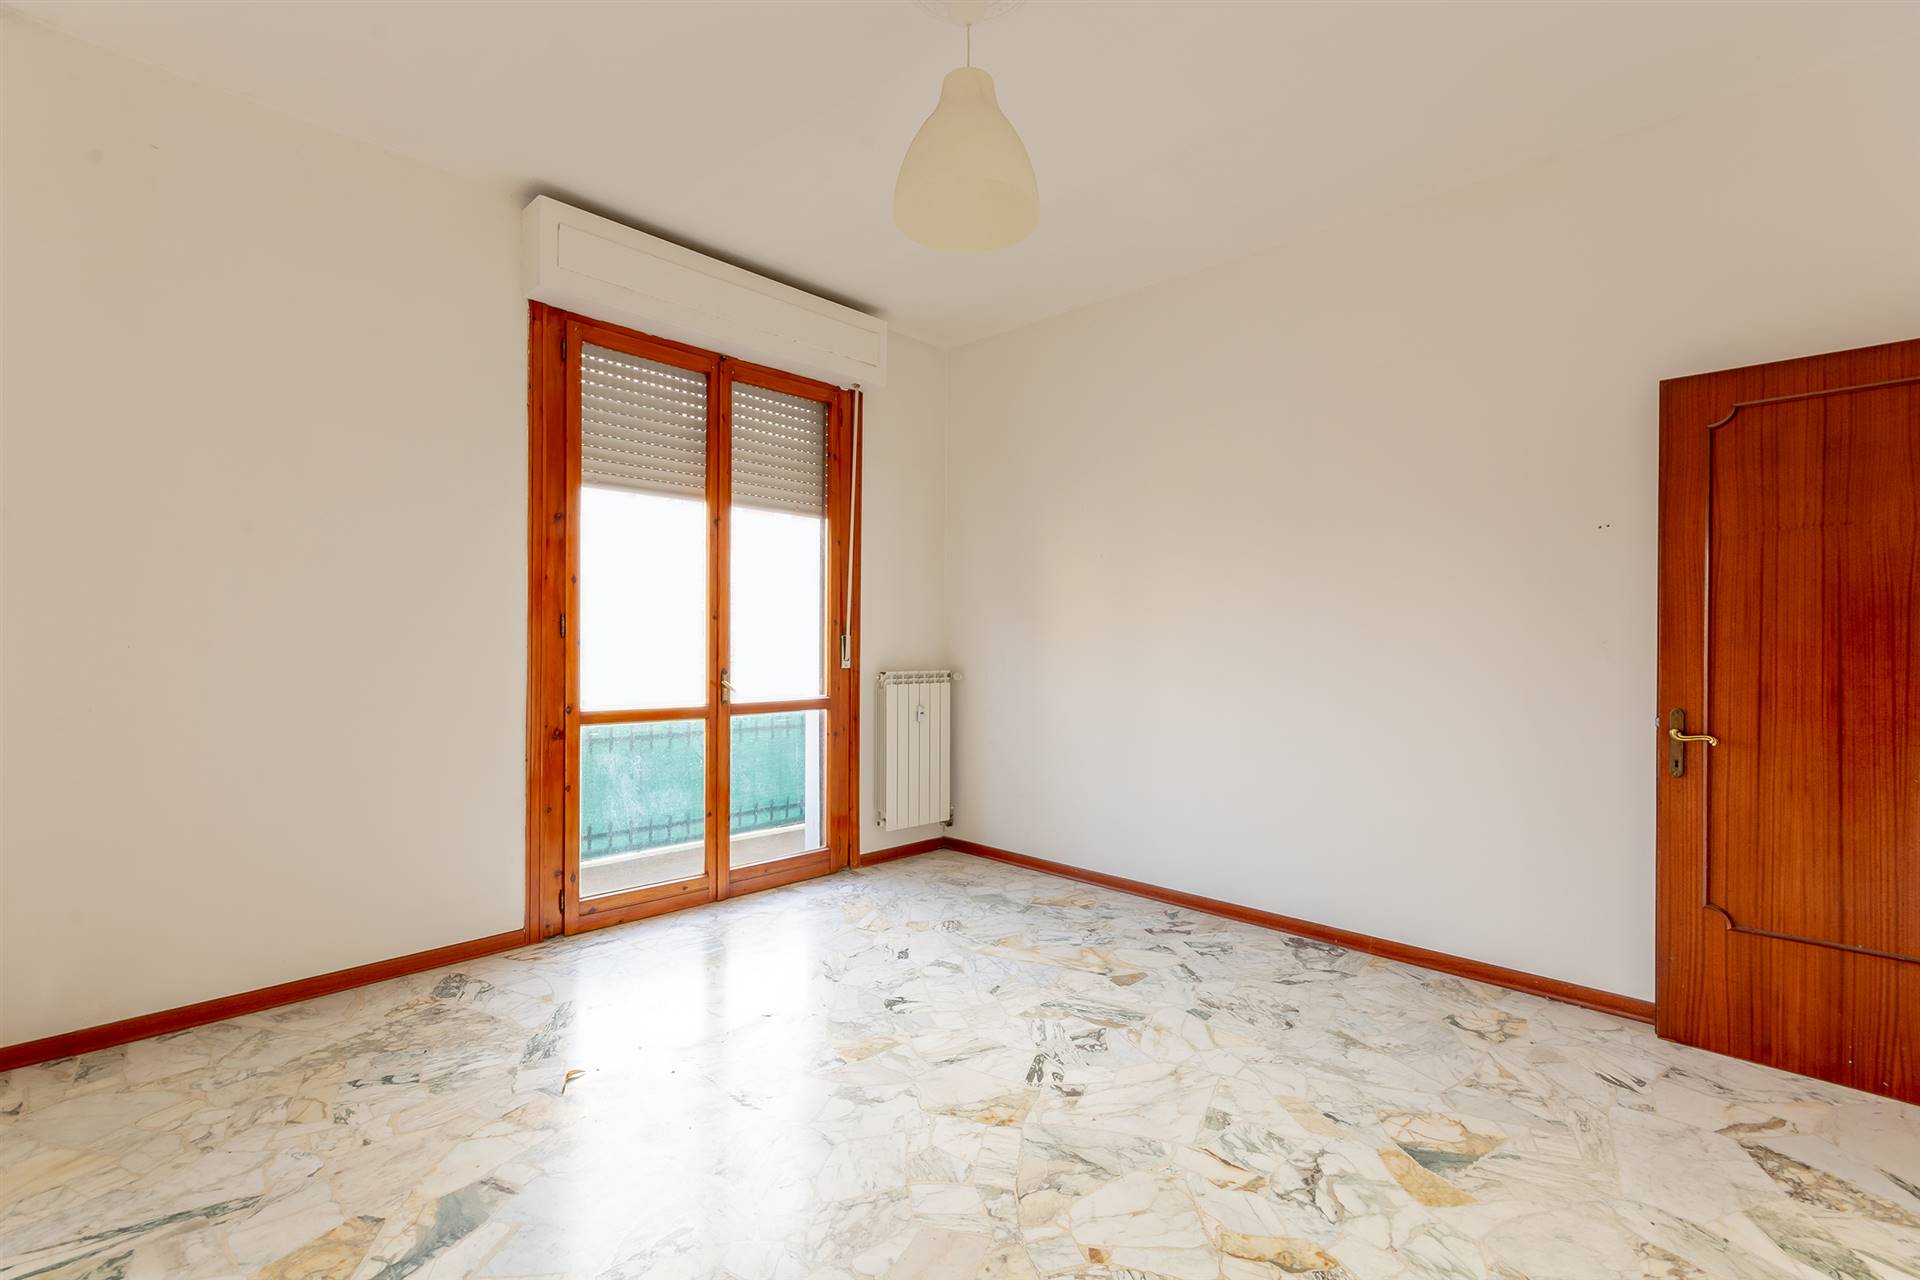 ALDO MORO, CAMPI BISENZIO, Apartment for sale of 76 Sq. mt., Habitable, Heating Centralized, Energetic class: G, placed at 2° on 4, composed by: 3 Rooms, Separate kitchen, 2 Bedrooms, 1 Bathroom, 